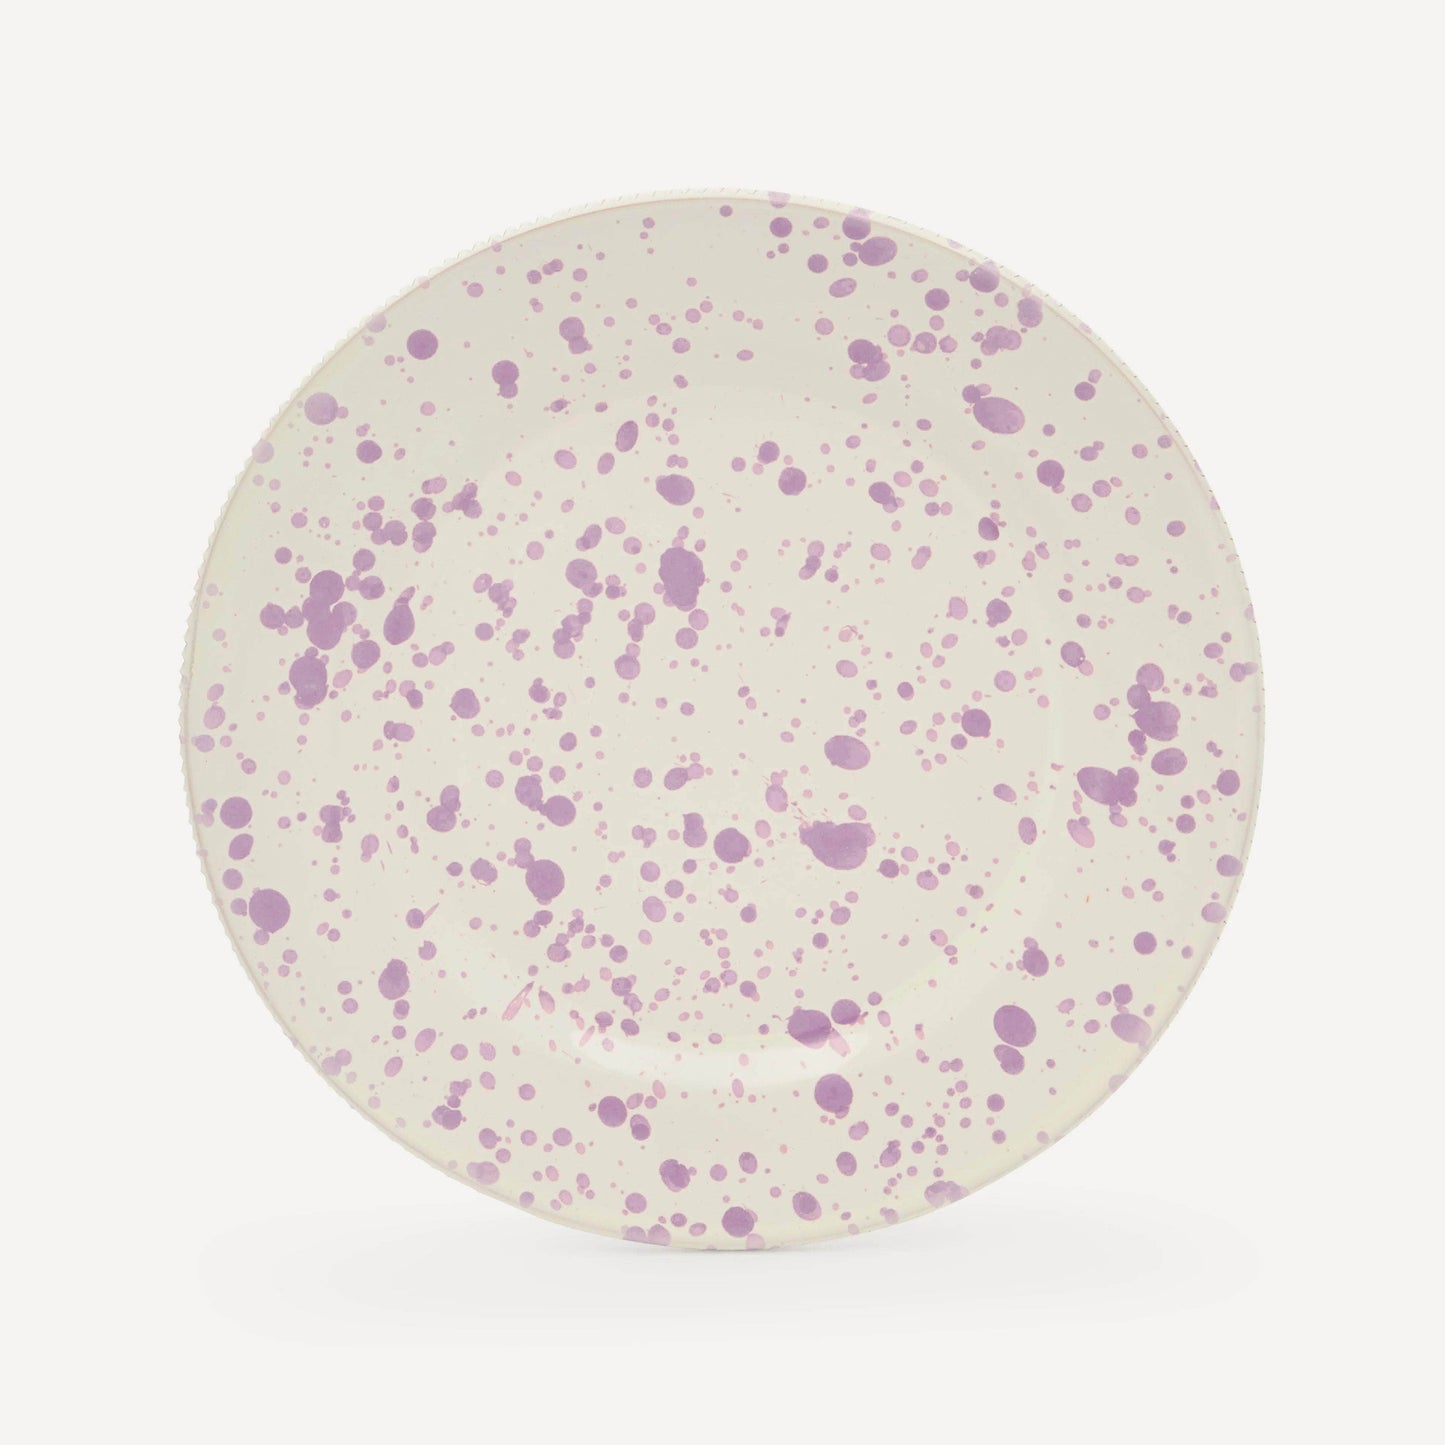 Load image into Gallery viewer, Hot Pottery Signature Set - Lilac
